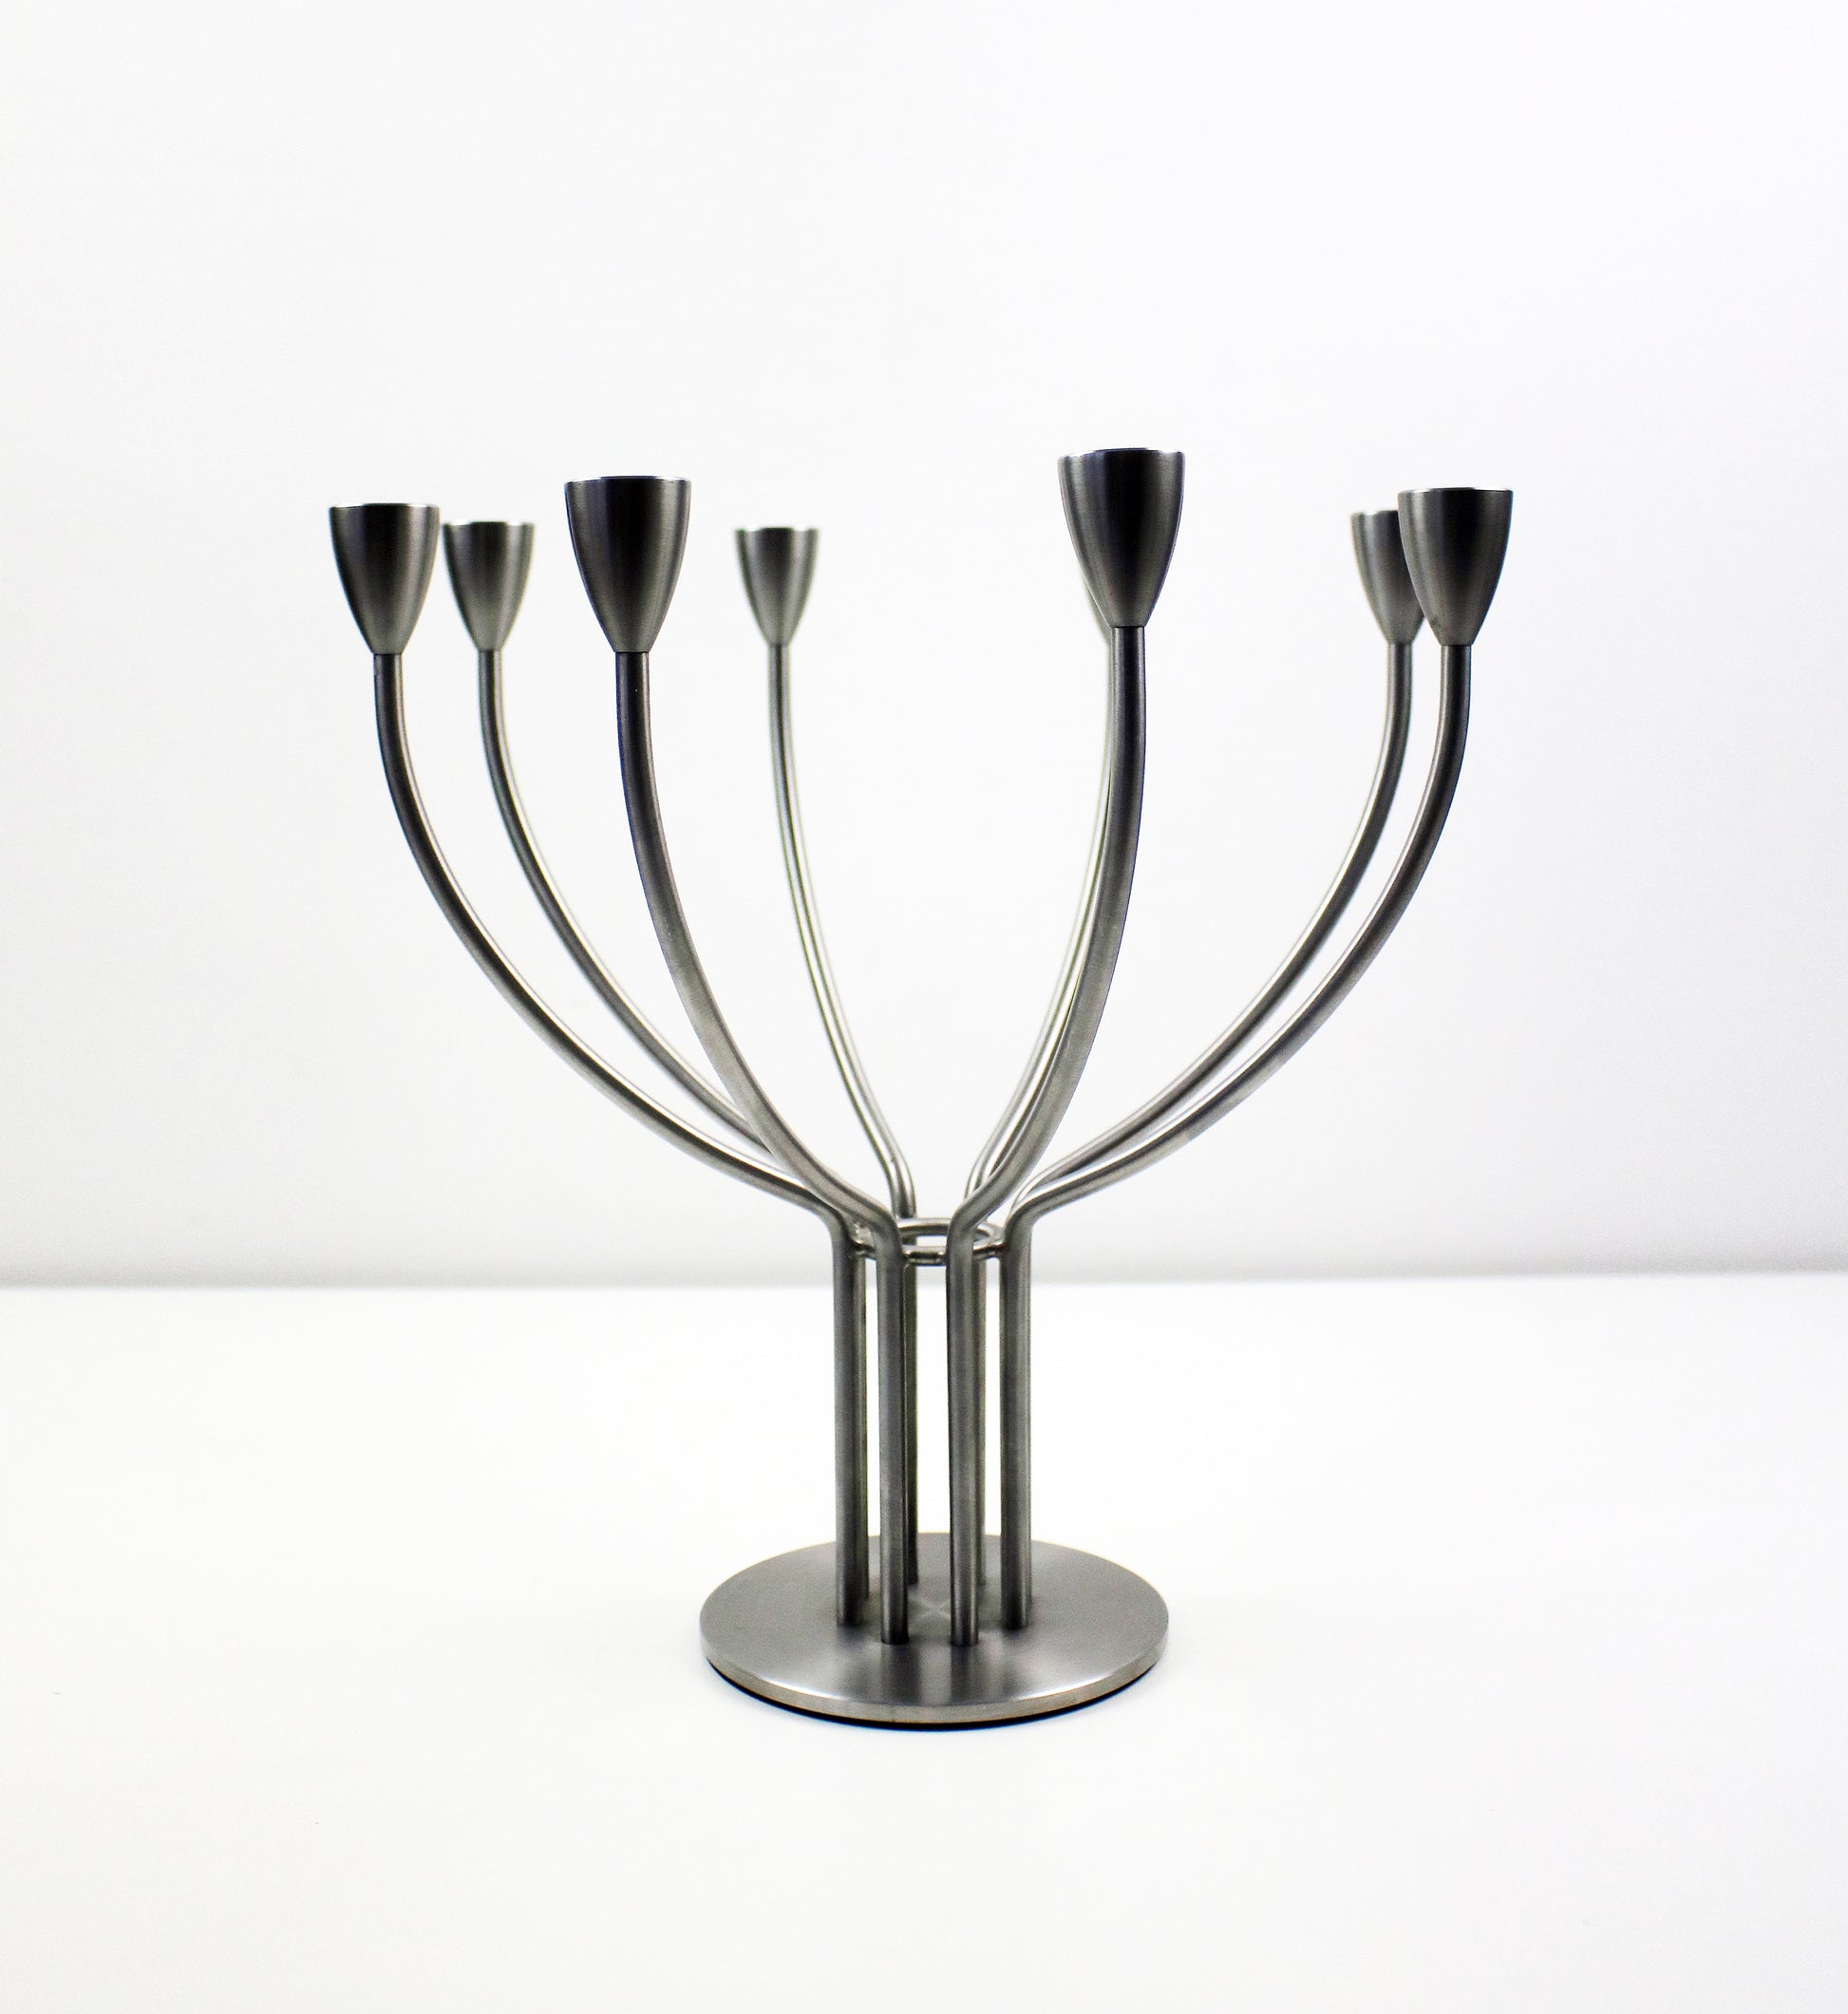 Stockholm steel candelabra by Knut and Marianne Hagberg for Ikea